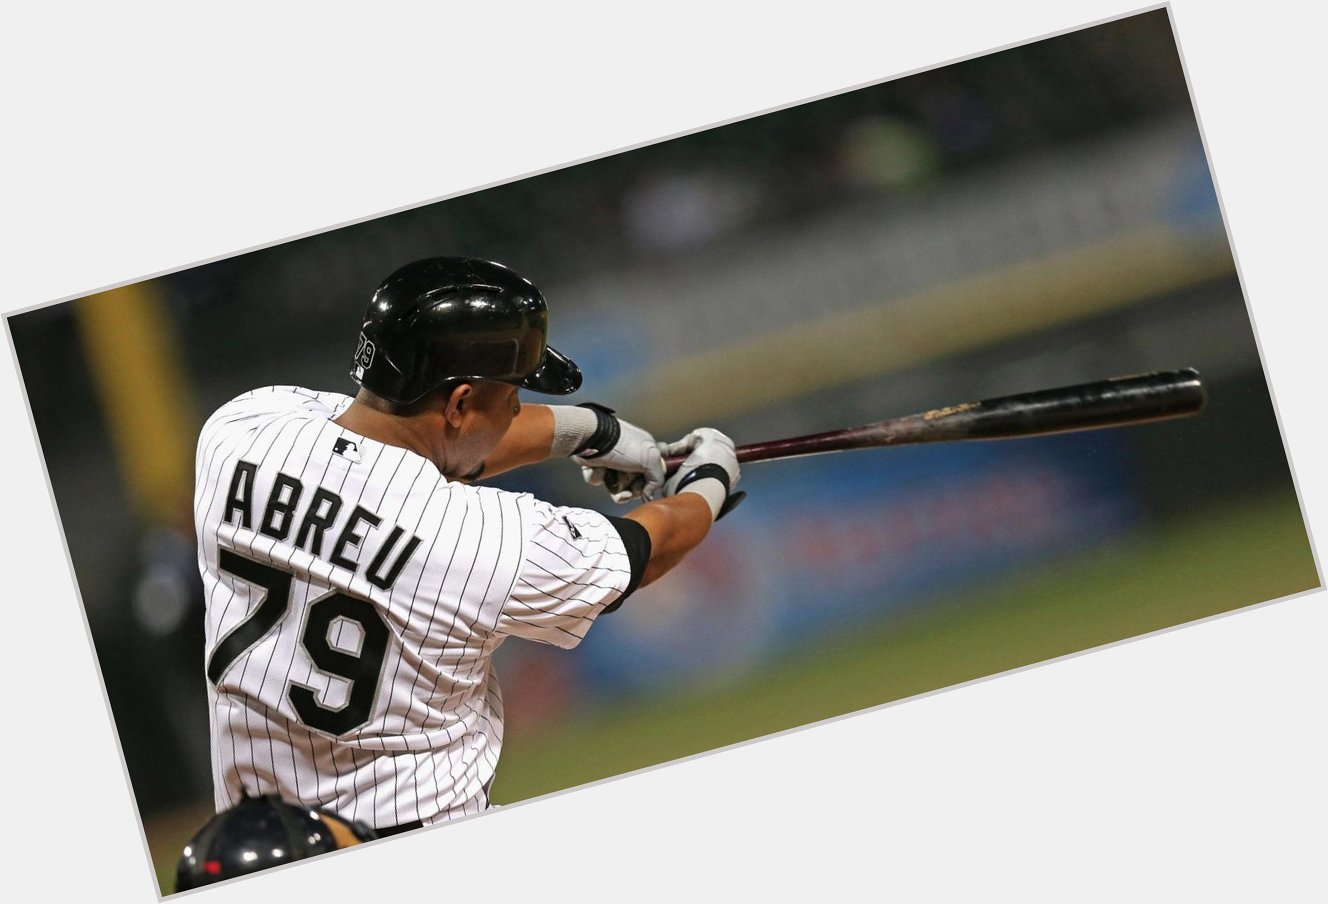 Happy birthday to 2014 Rookie of the Year, Jose Abreu. 